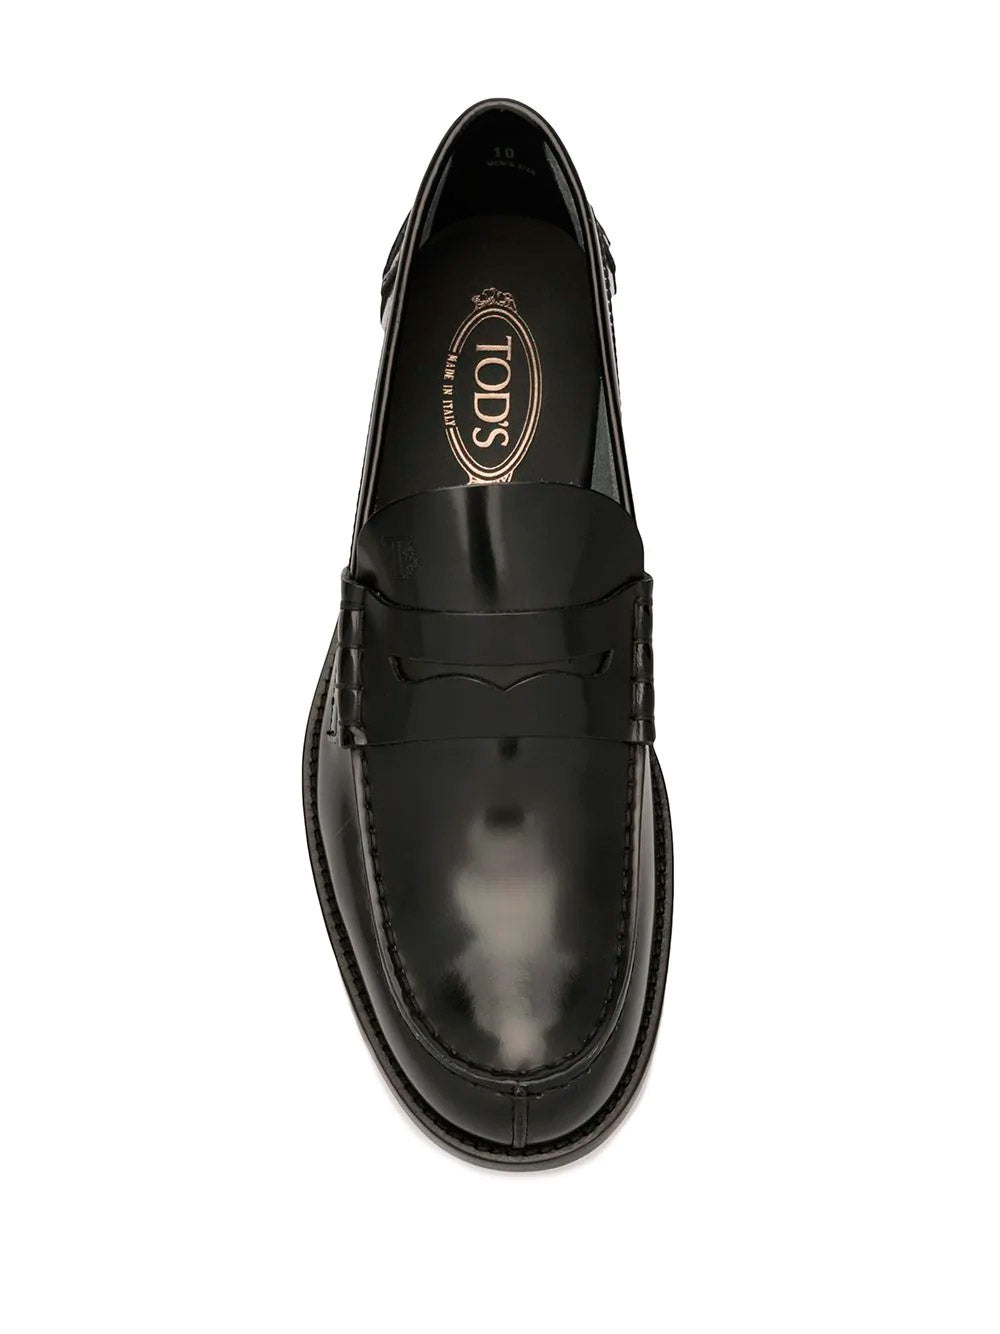 Classic black leather loafers